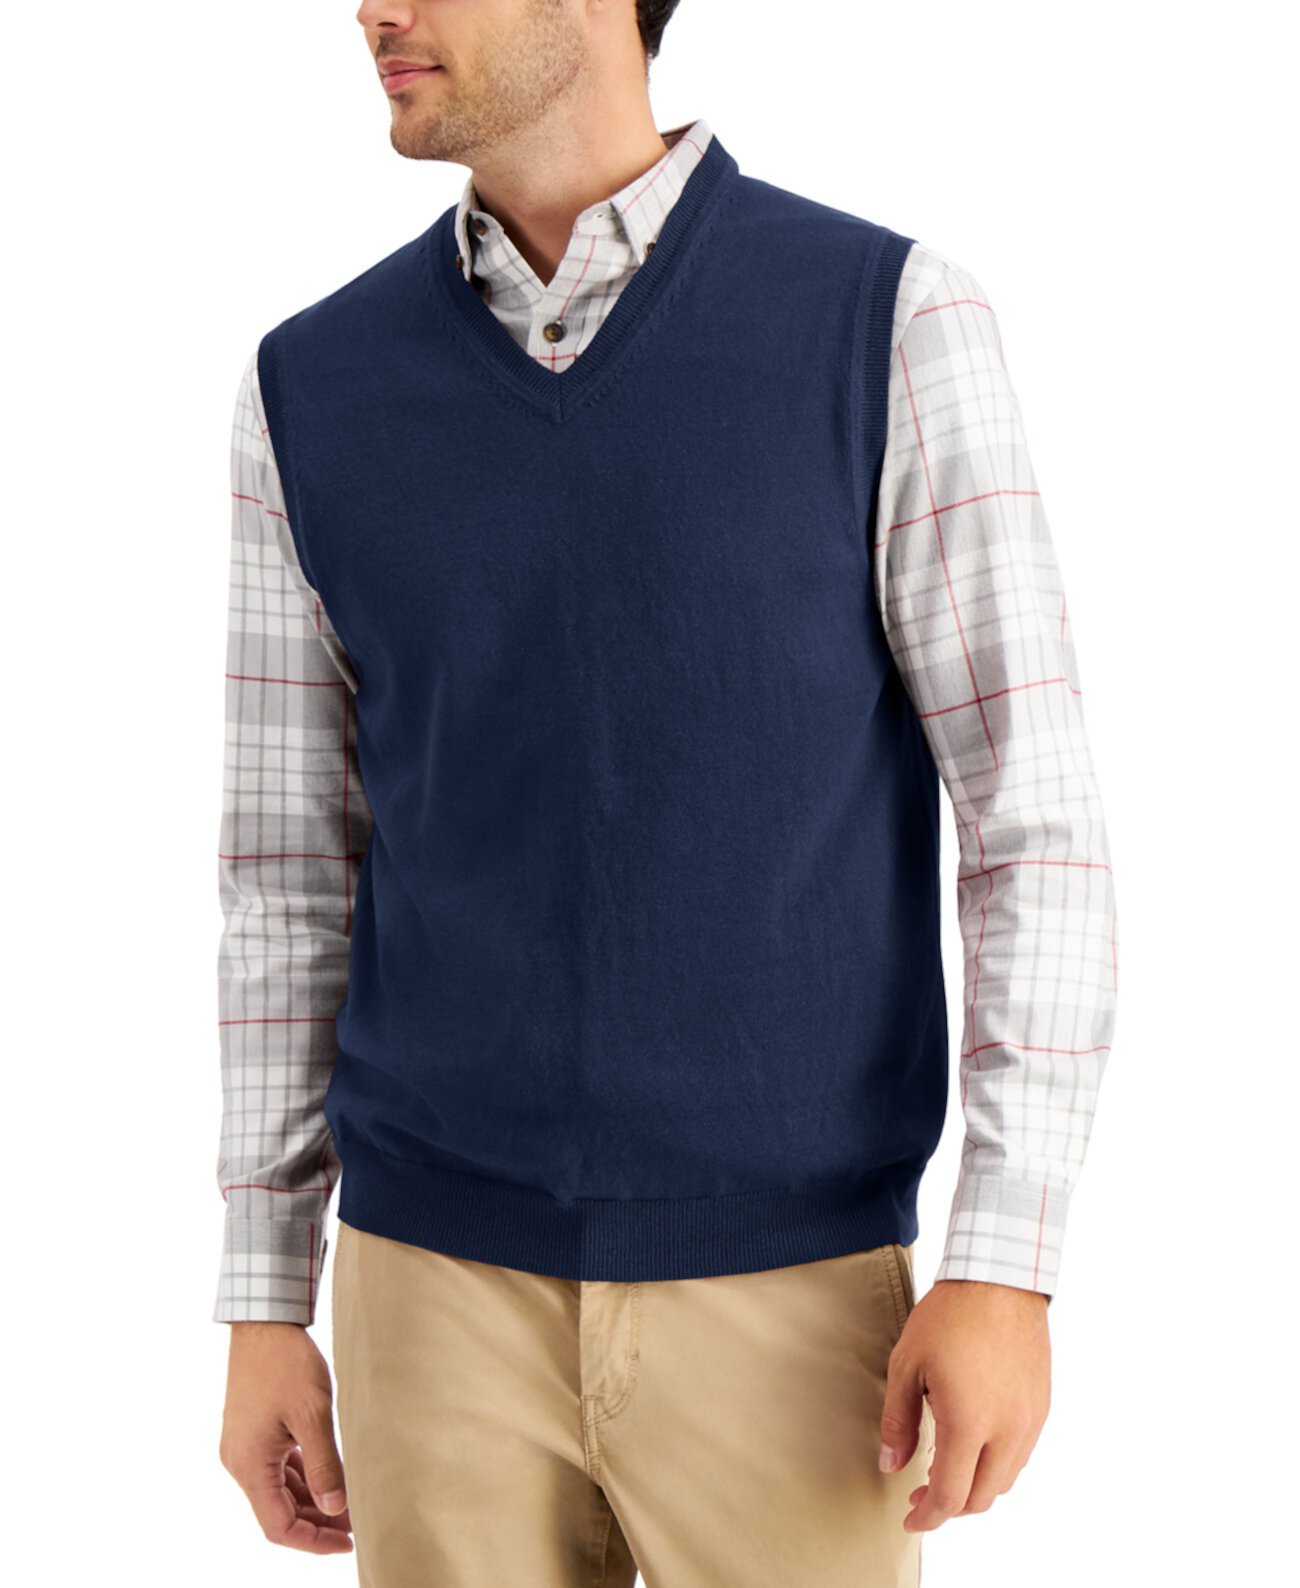 Men's Solid V-Neck Sweater Vest, Created for Macy's Club Room